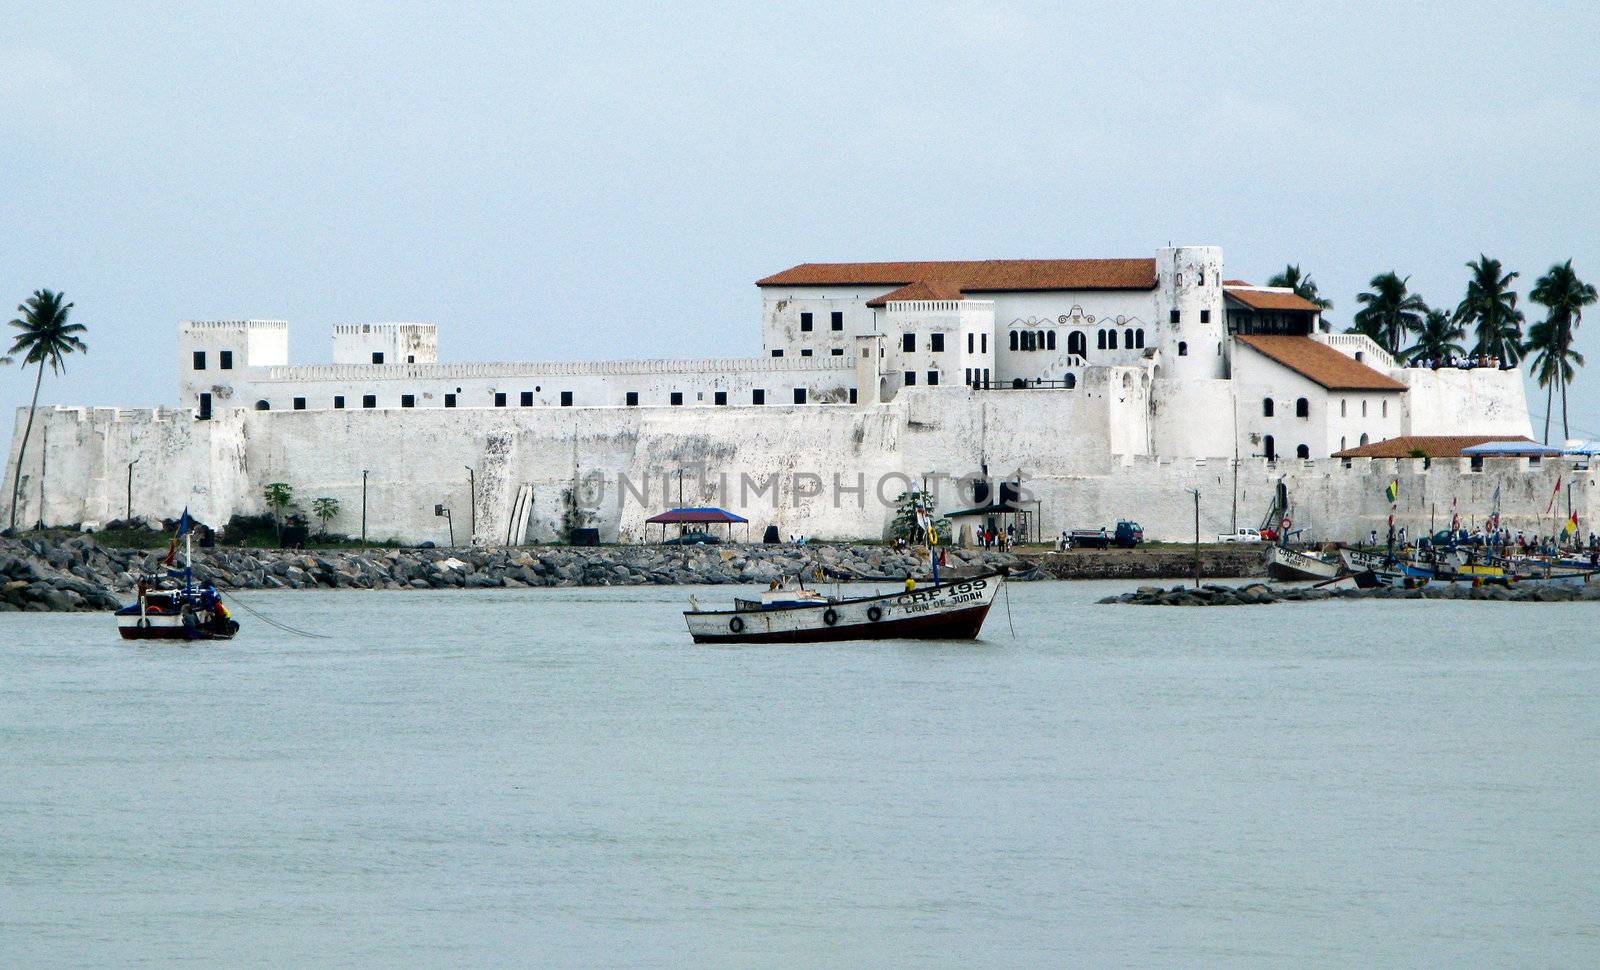 Old slave fort of Elmina near Accra in Ghana seen from the sea